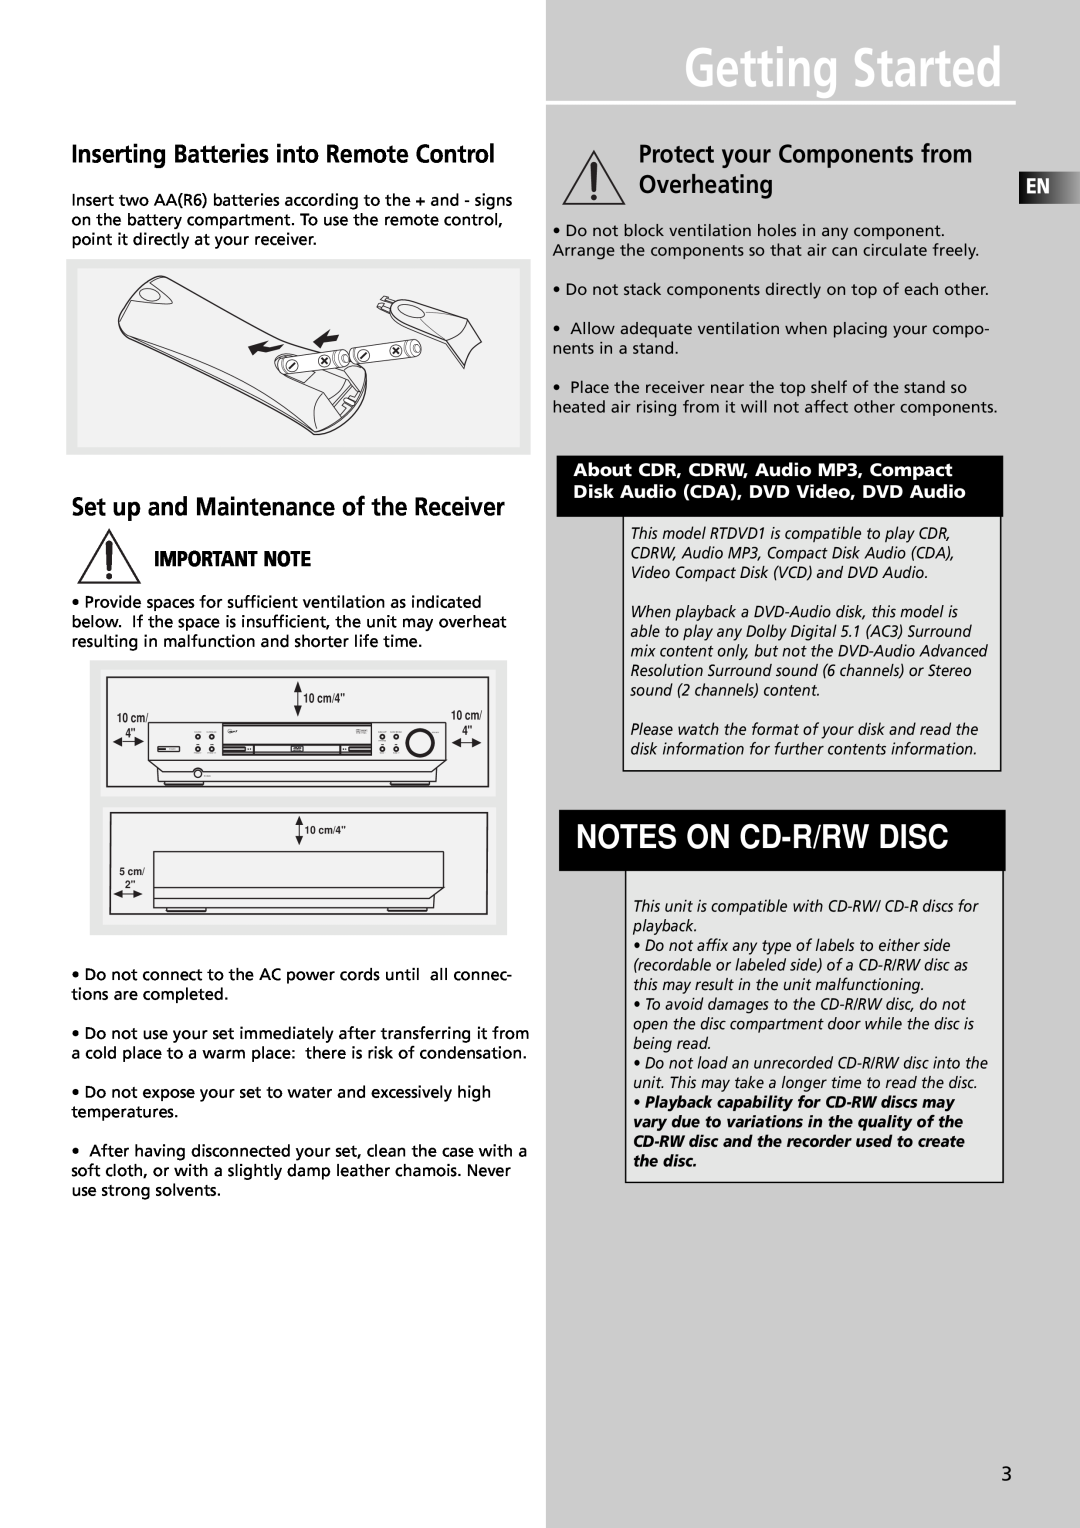 RCA RTDVD1 user manual Protect your Components from OverheatingEN, Set up and Maintenance of the Receiver, Important Note 